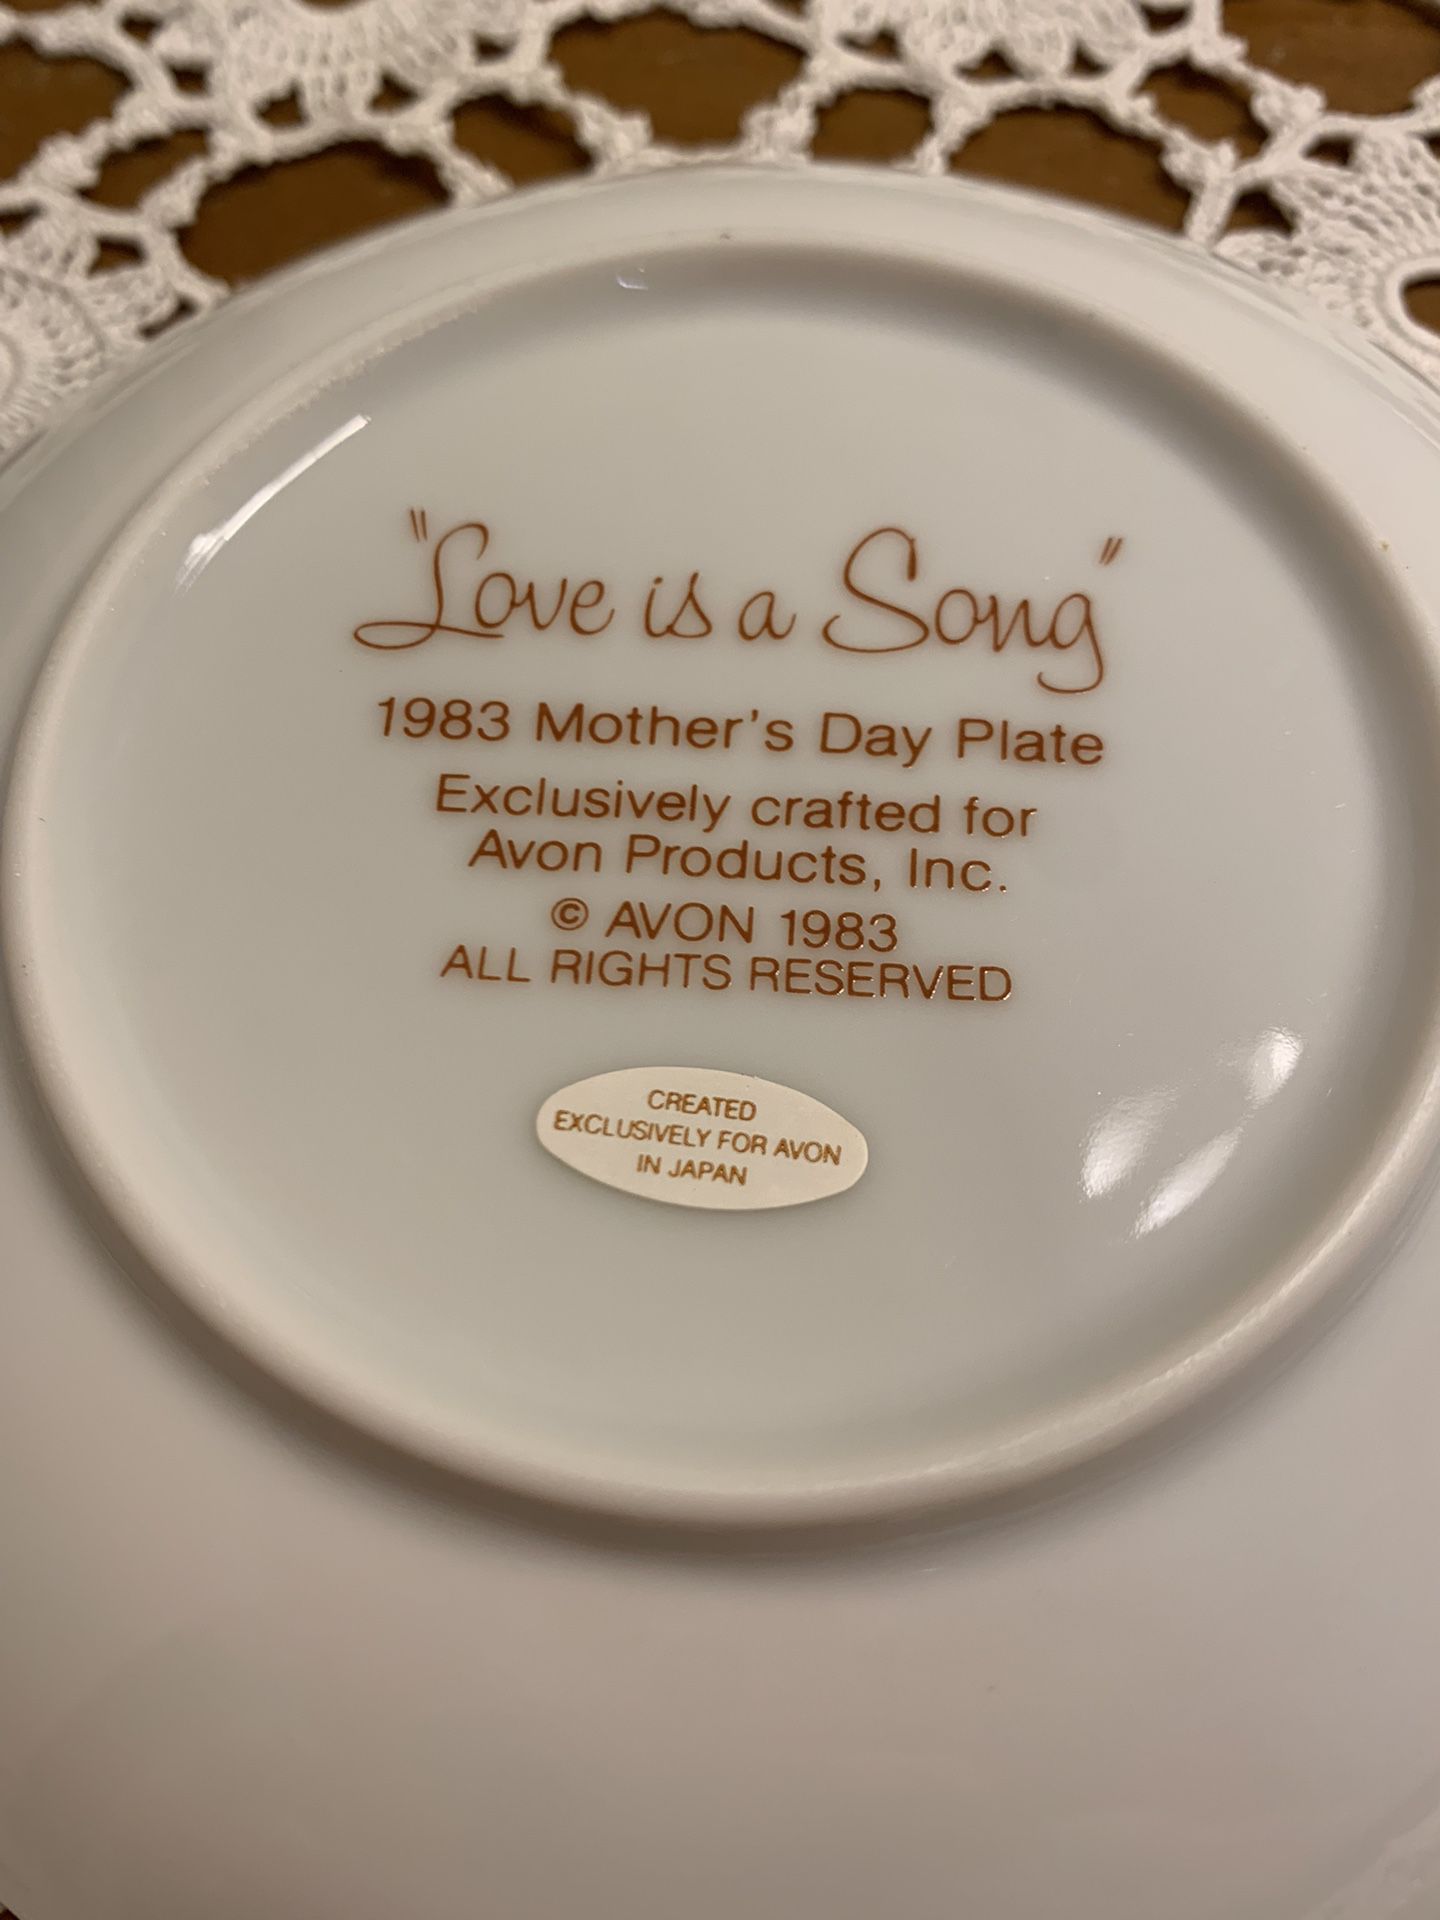 Vintage Avon 1983 Mother’s Day Plate “Love Is A Song”